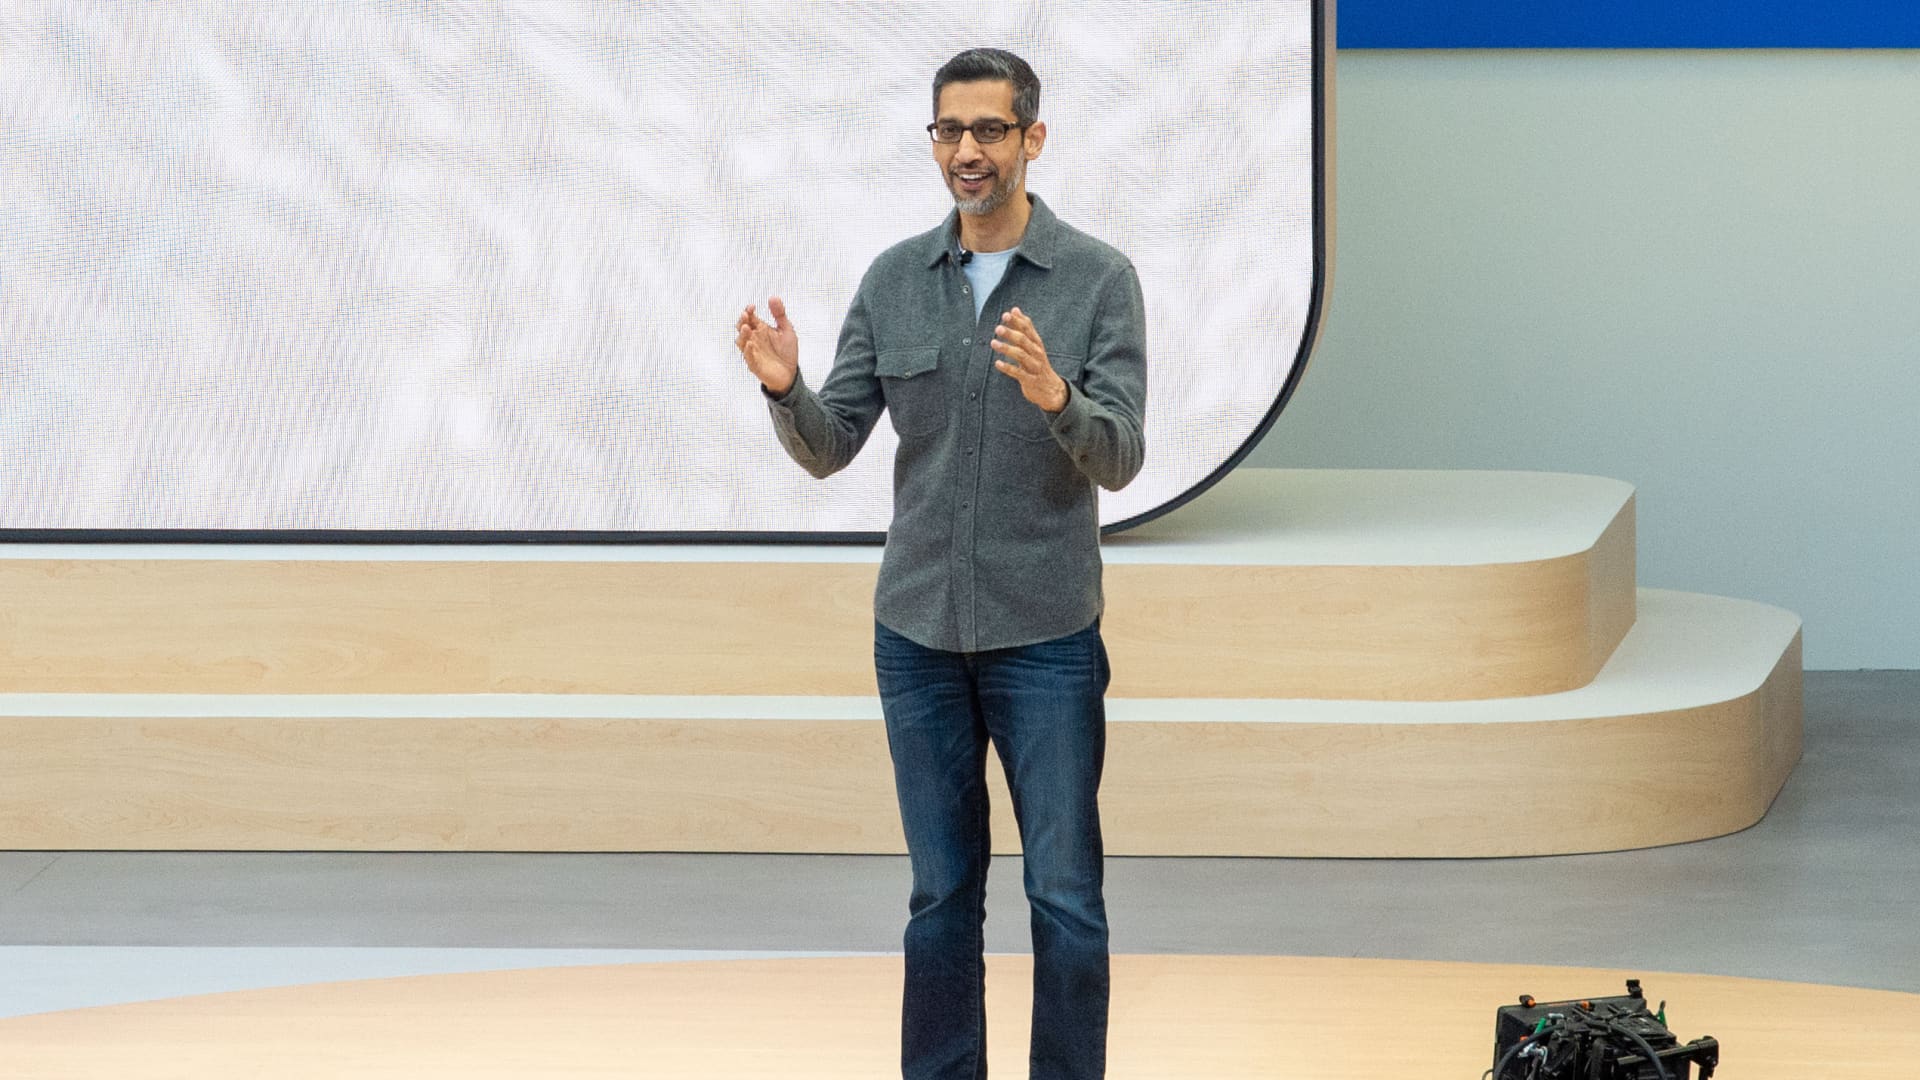 Google I/O wrap-up: Gemini AI updates, new search features and more